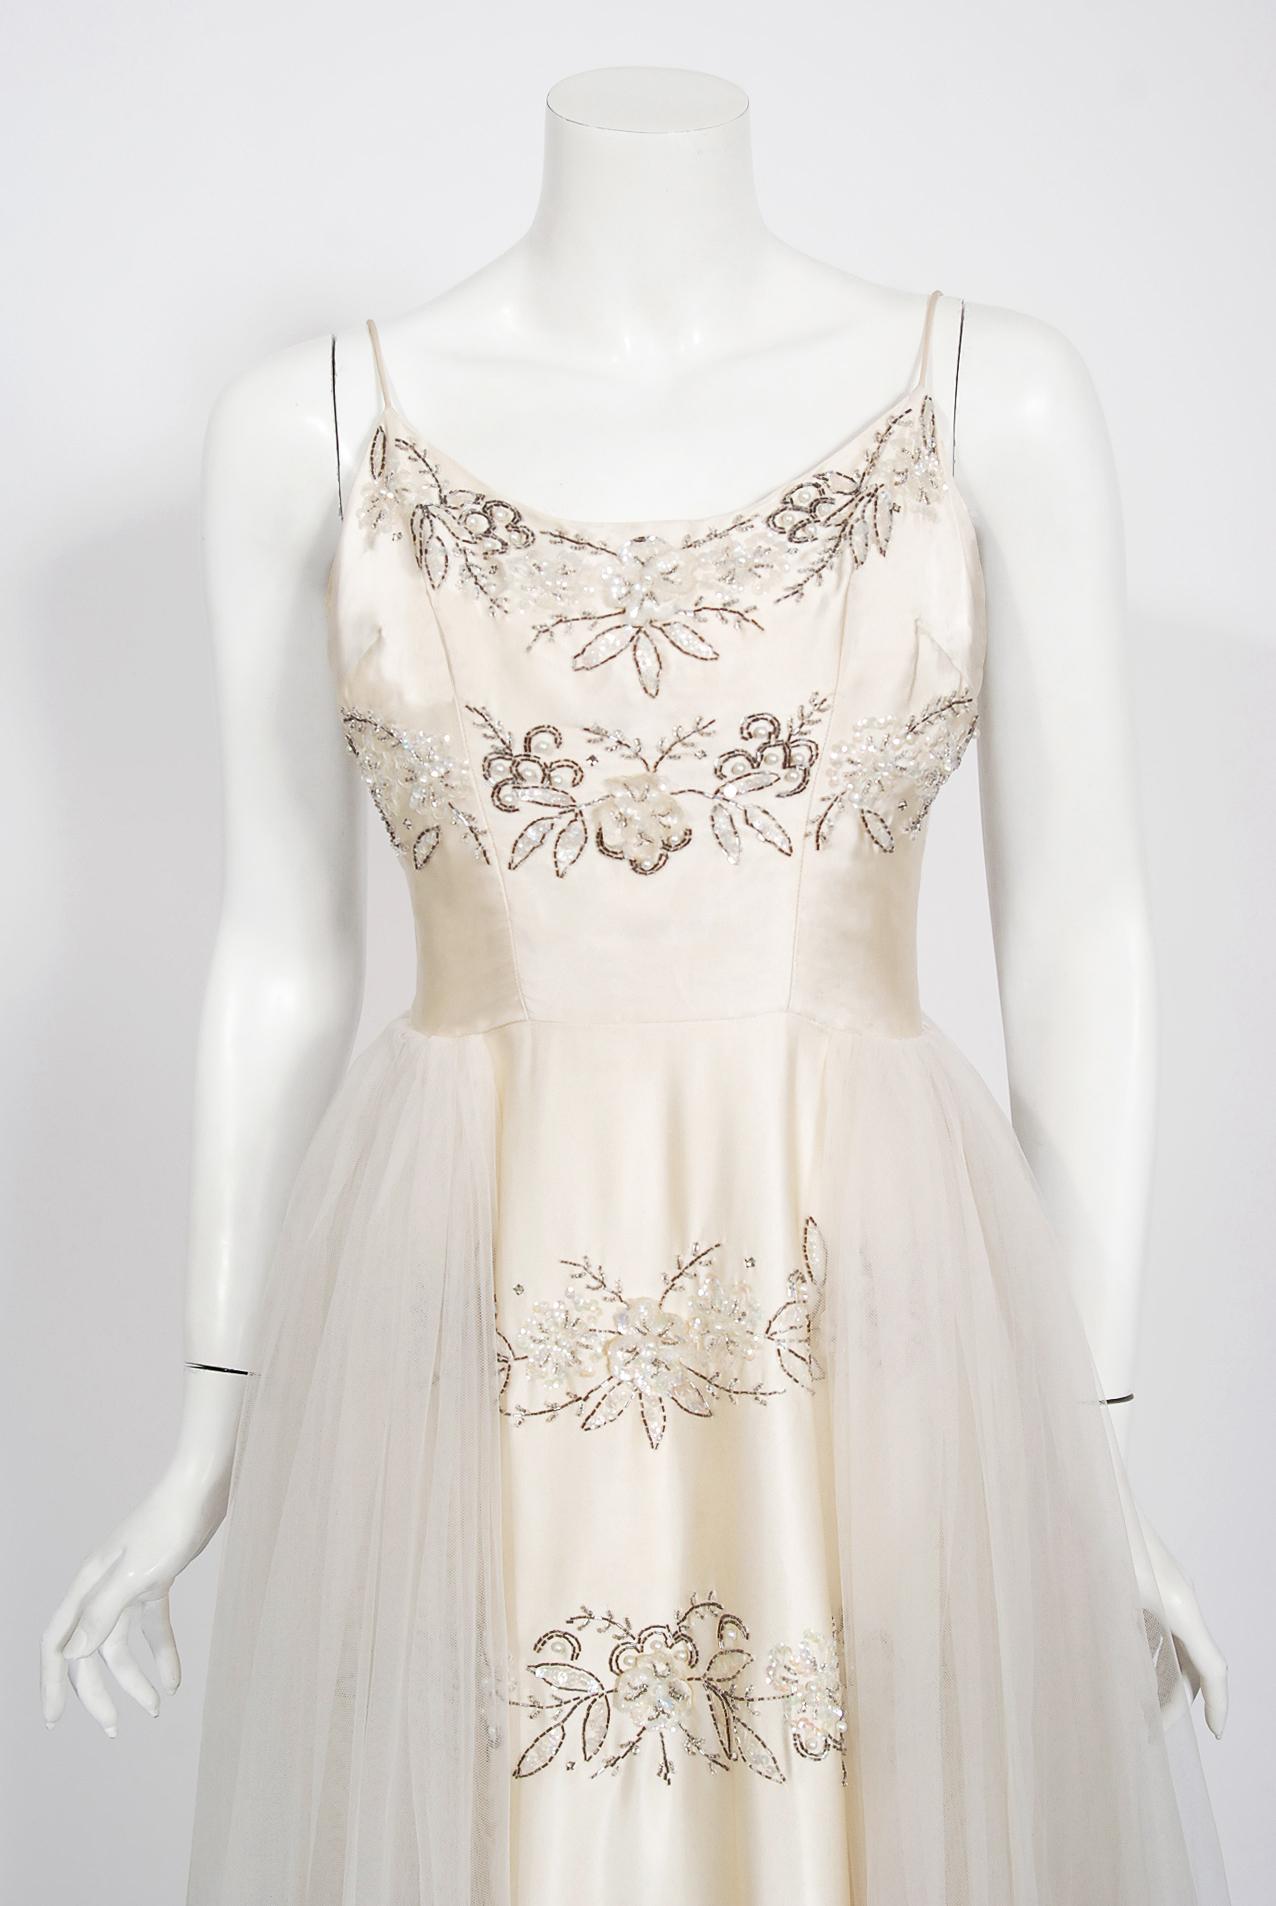 Breathtaking mid-1950's ivory white bridal dress by the highly adored label 